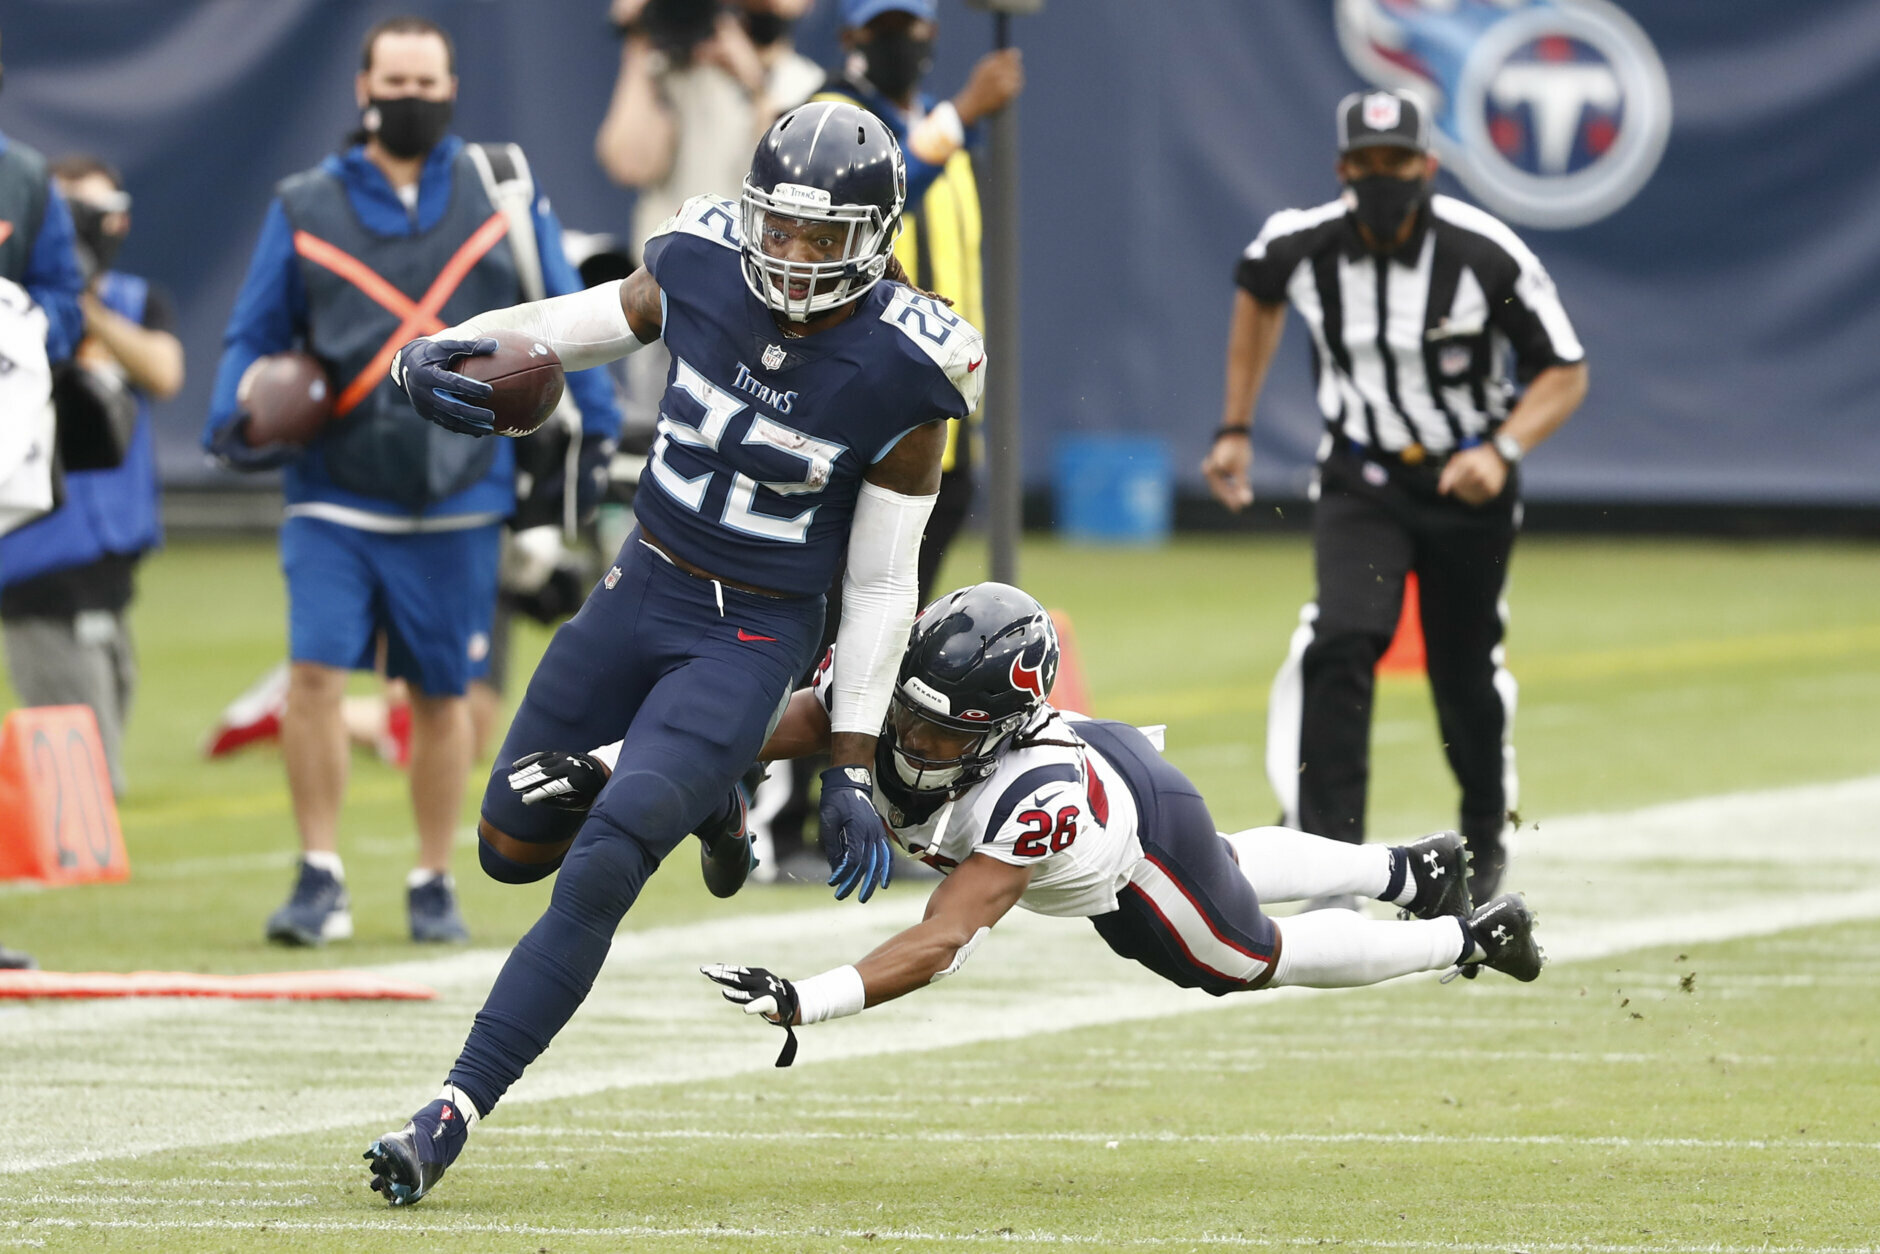 <p><b><i>Texans 36</i></b><br />
<b><i>Titans 42 (OT)</i></b></p>
<p>While many are questioning Romeo Crennel&#8217;s questionable late decision to go for a two-point conversion, I kind of see what he was thinking. Derrick Henry gashed the Texans defense for a career-high 264 scrimmage yards, including a 94-yard touchdown run, and the only way to beat him is to outscore him. If Henry even plays half as well against the Steelers next week, Tennessee is a runaway train on collision course with Kansas City in an AFC title game rematch.</p>
<p>Speaking of King Henry &#8230;</p>
